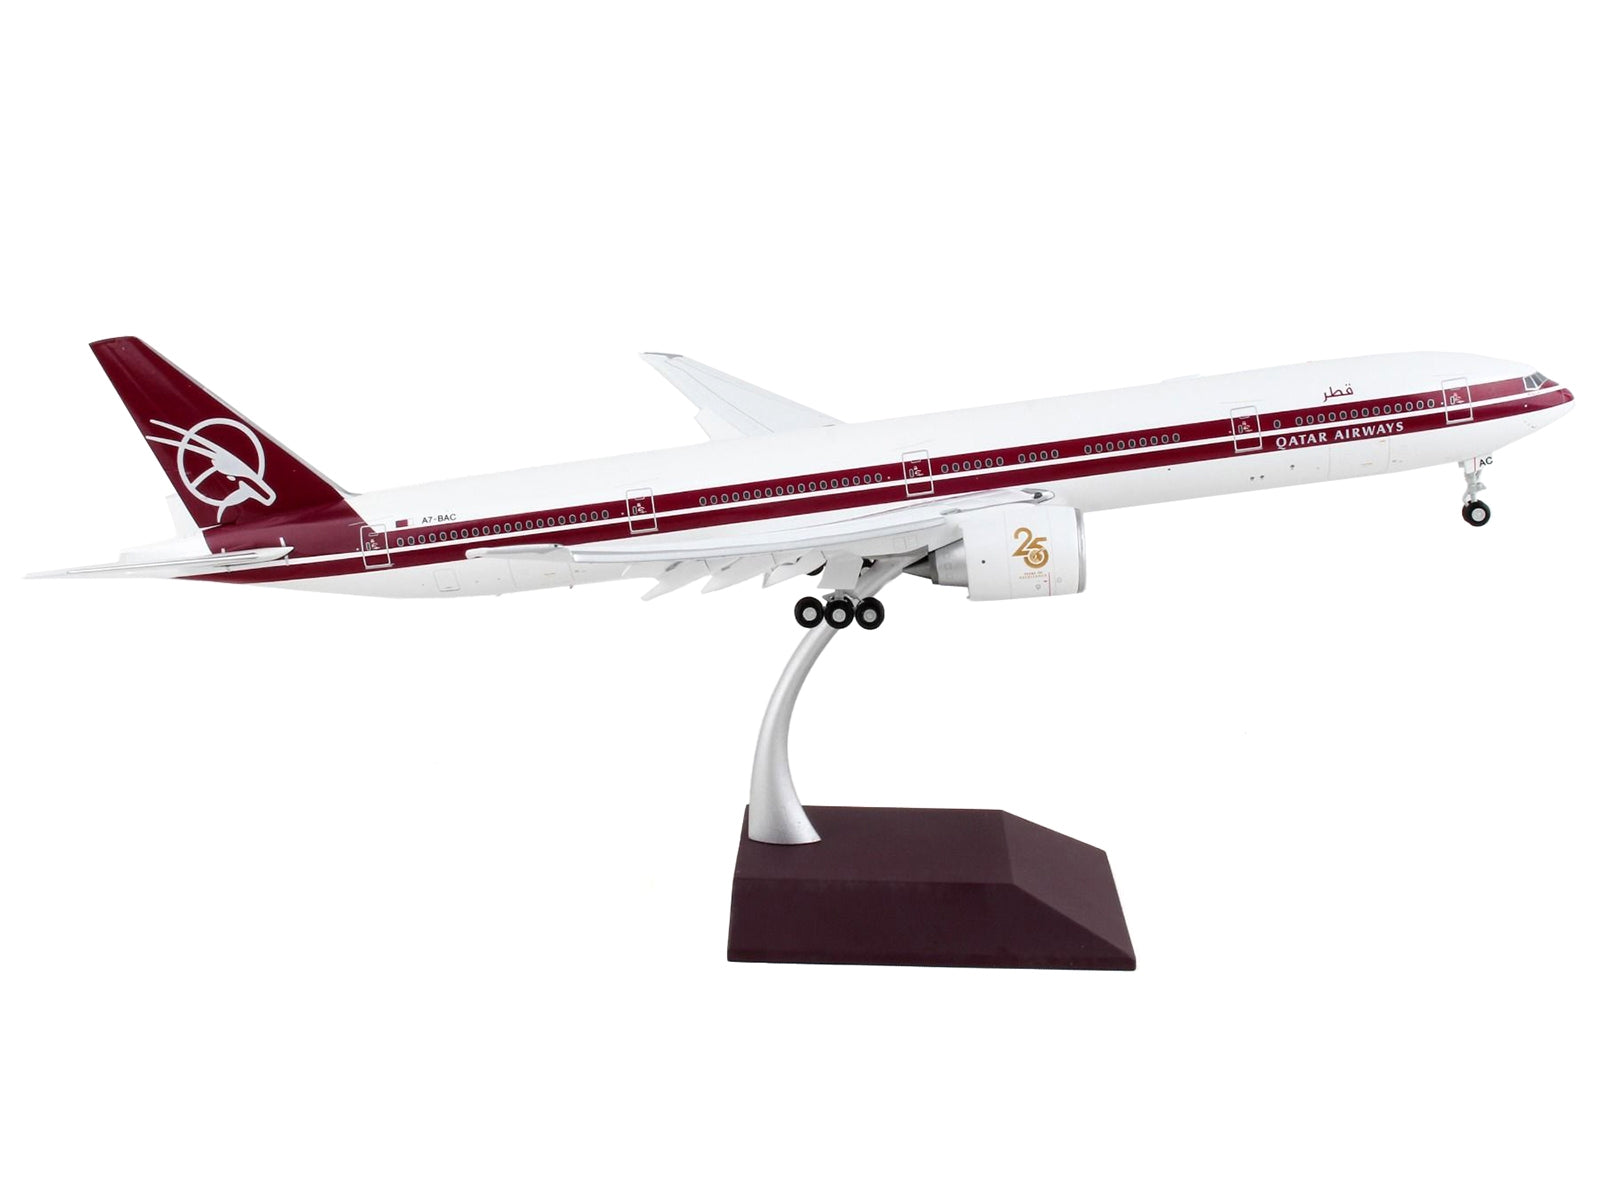 Boeing 777-300ER Commercial Aircraft with Flaps Down "Qatar Airways"